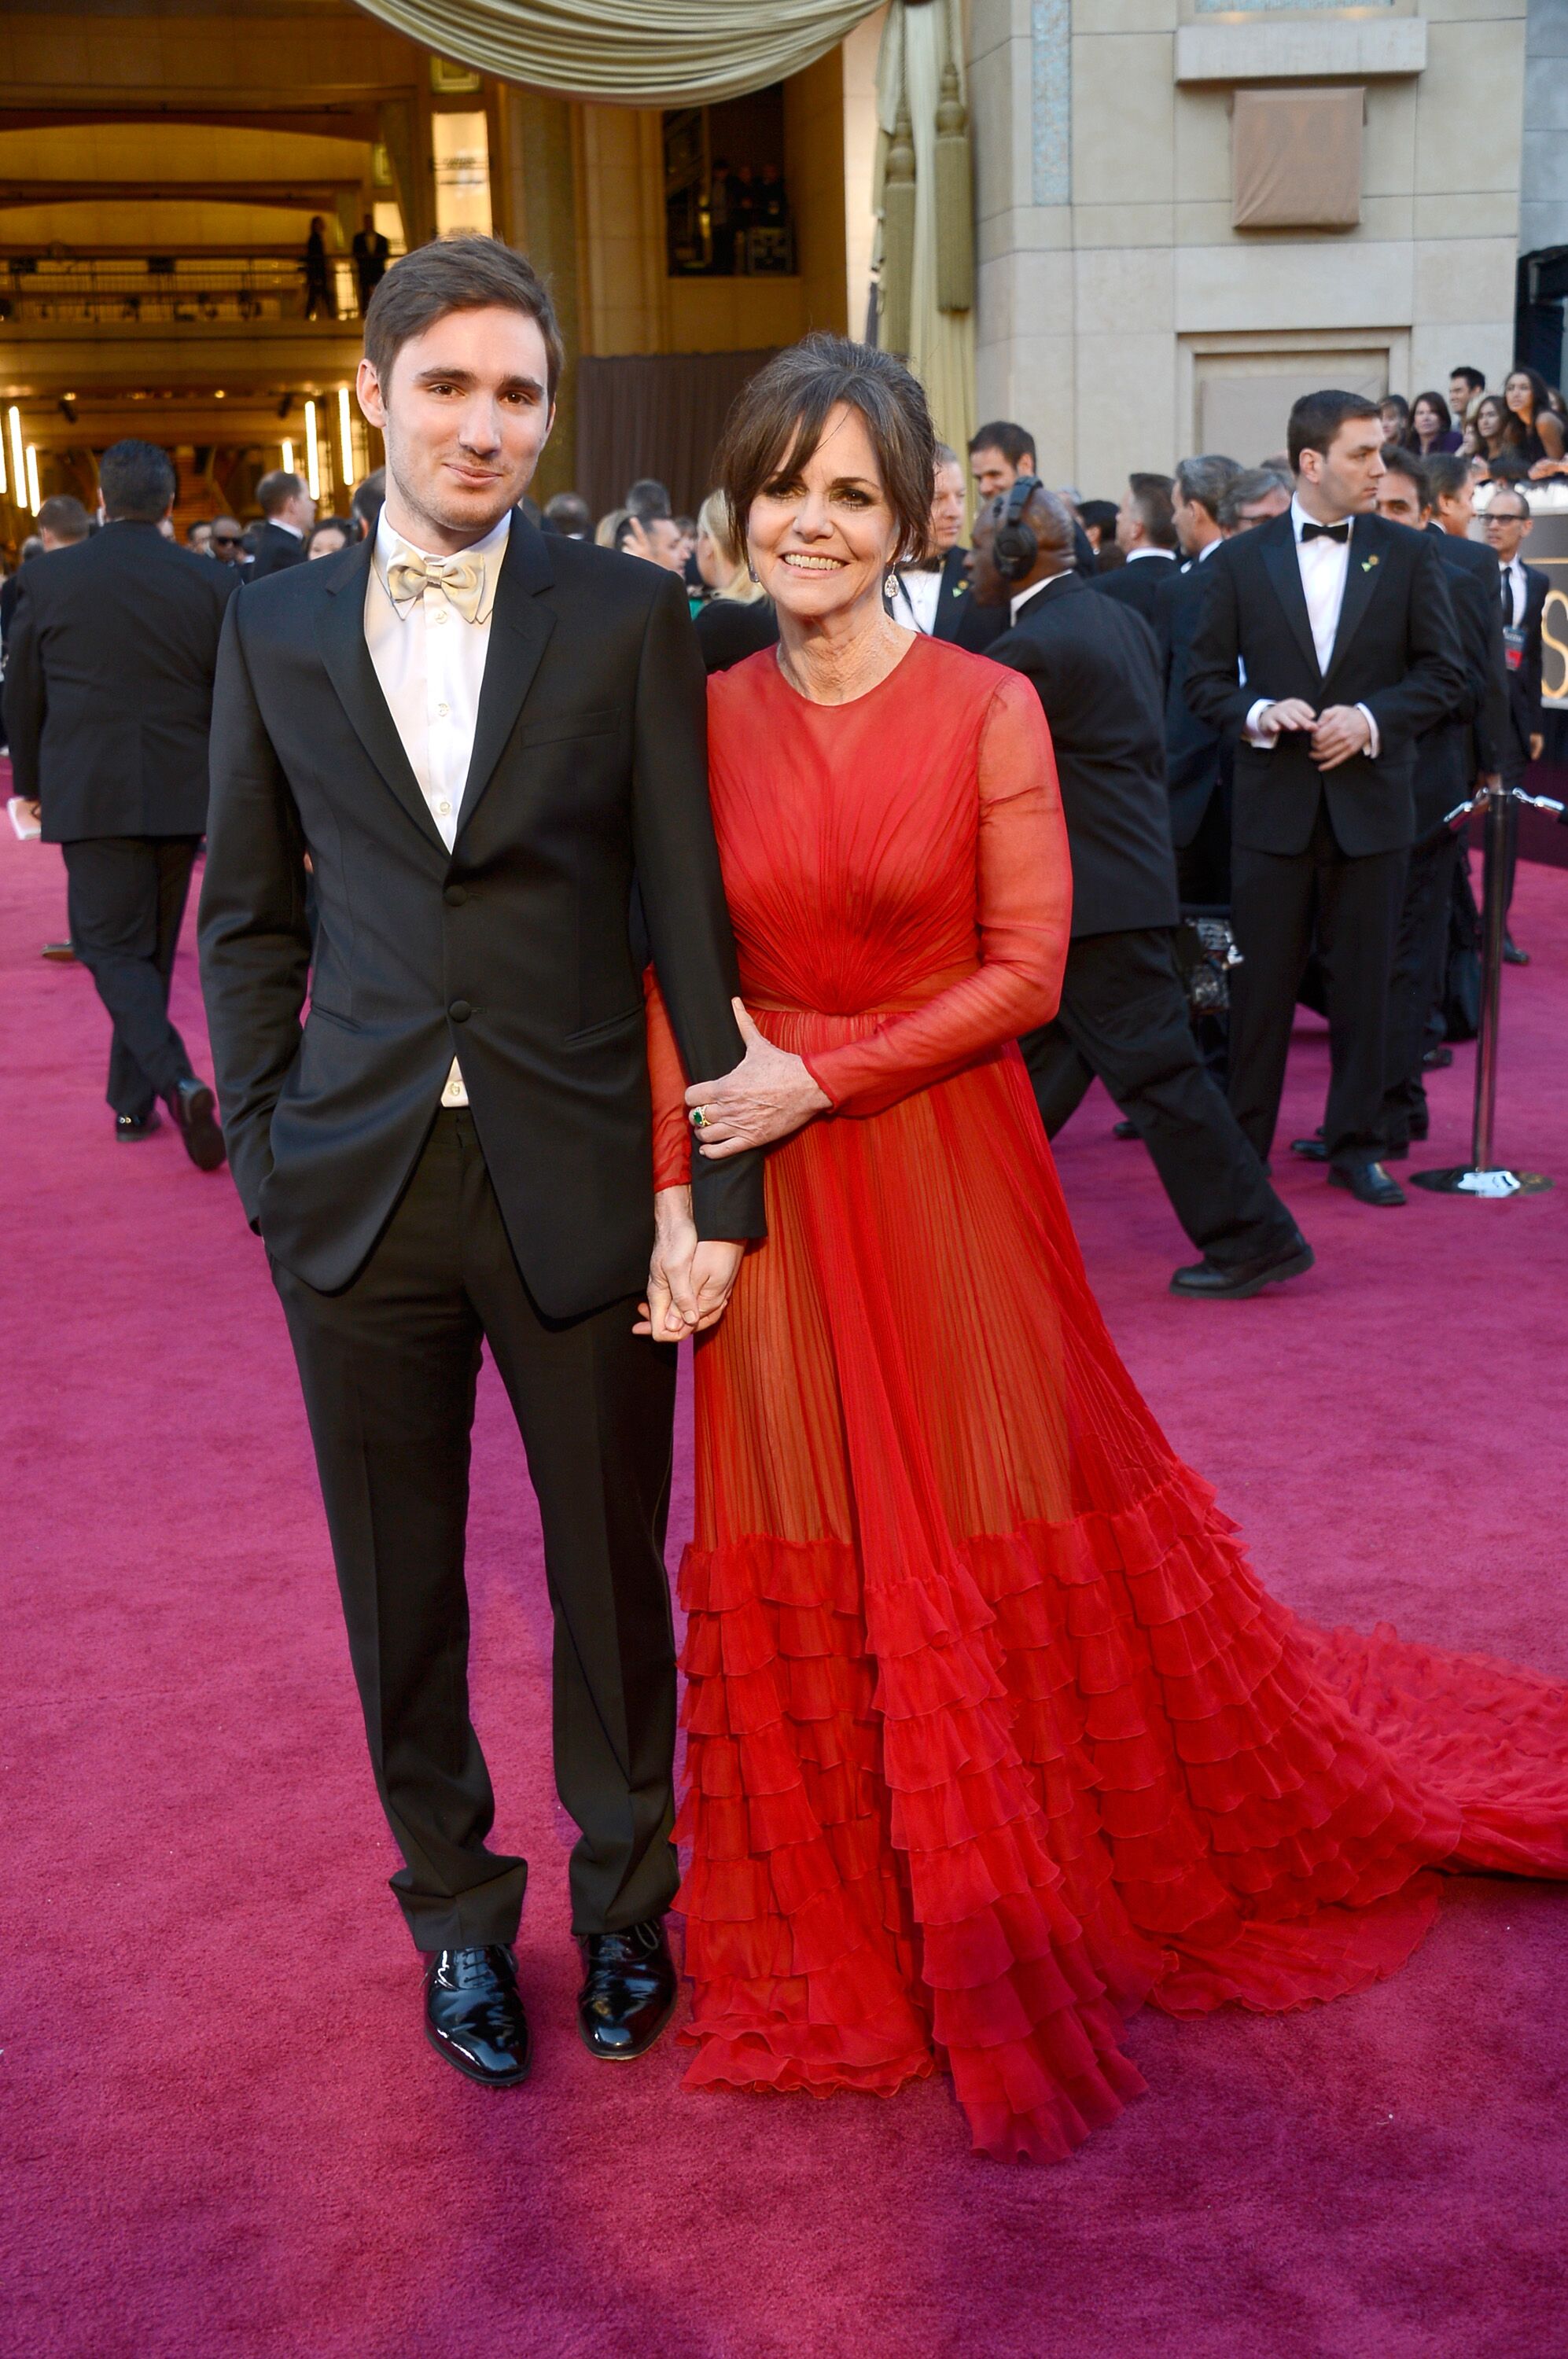 Sally Field and Sam Greisman at the Oscars. | Source: Getty Images